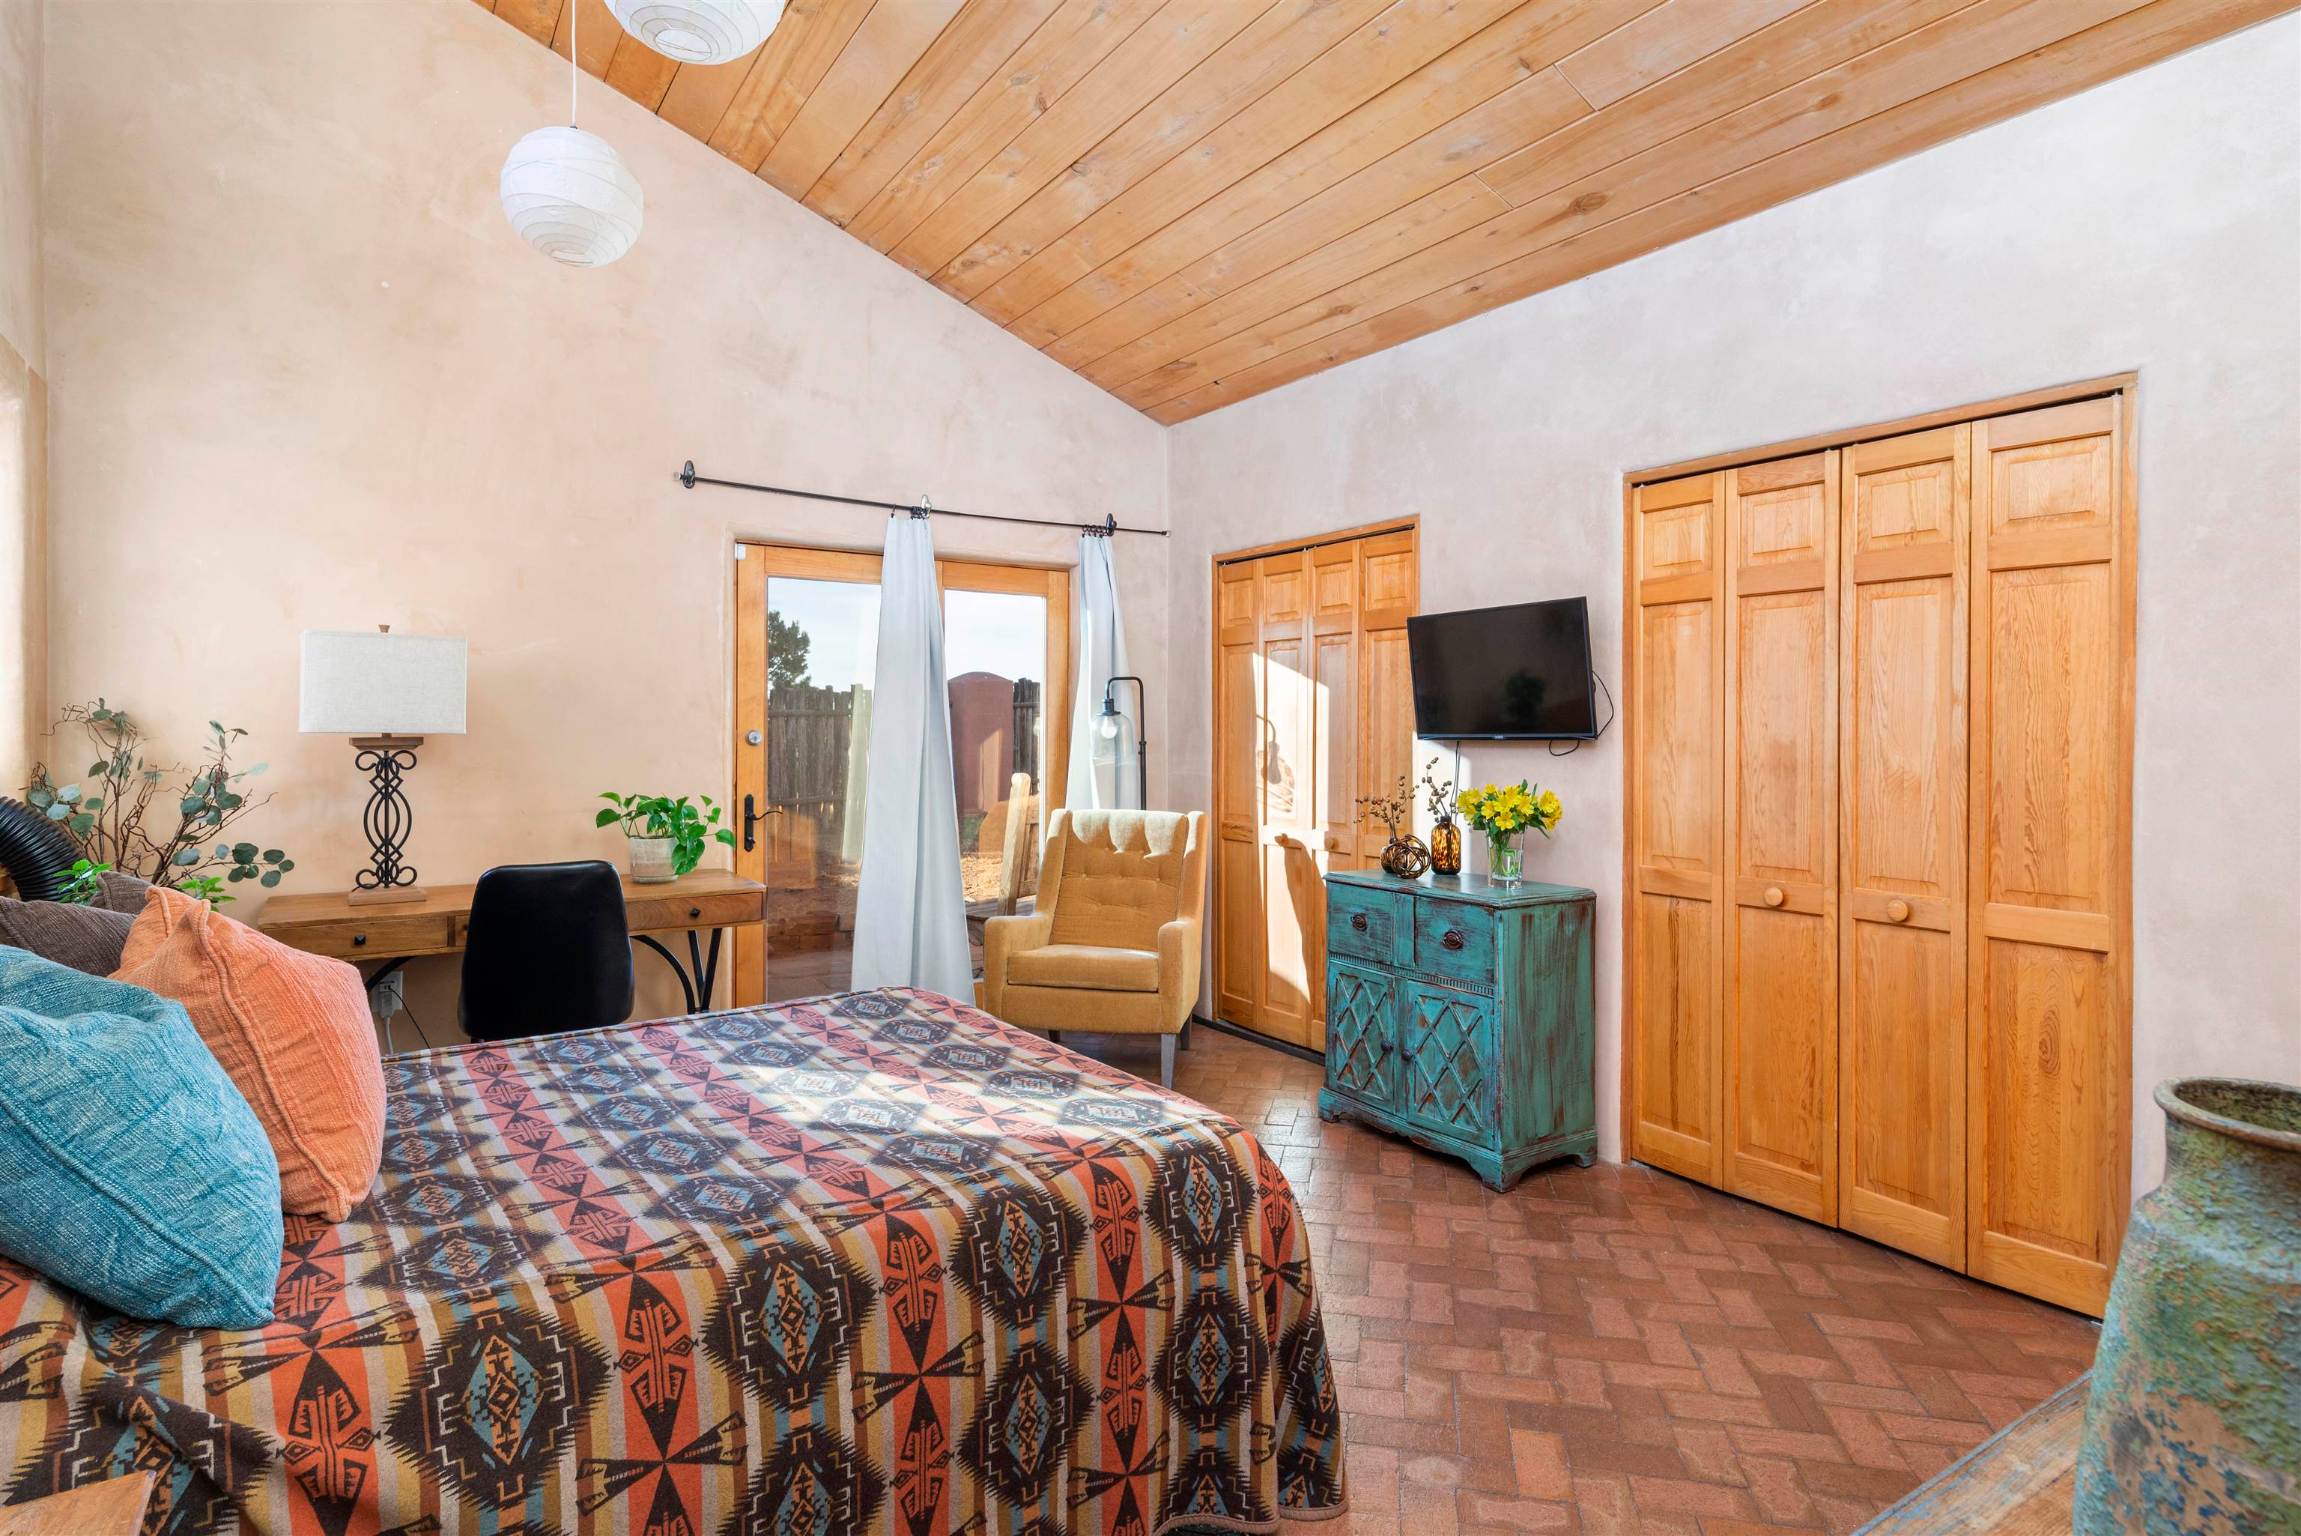 3 Aula, Santa Fe, New Mexico 87508, 2 Bedrooms Bedrooms, ,1 BathroomBathrooms,Residential,For Sale,3 Aula,202105526